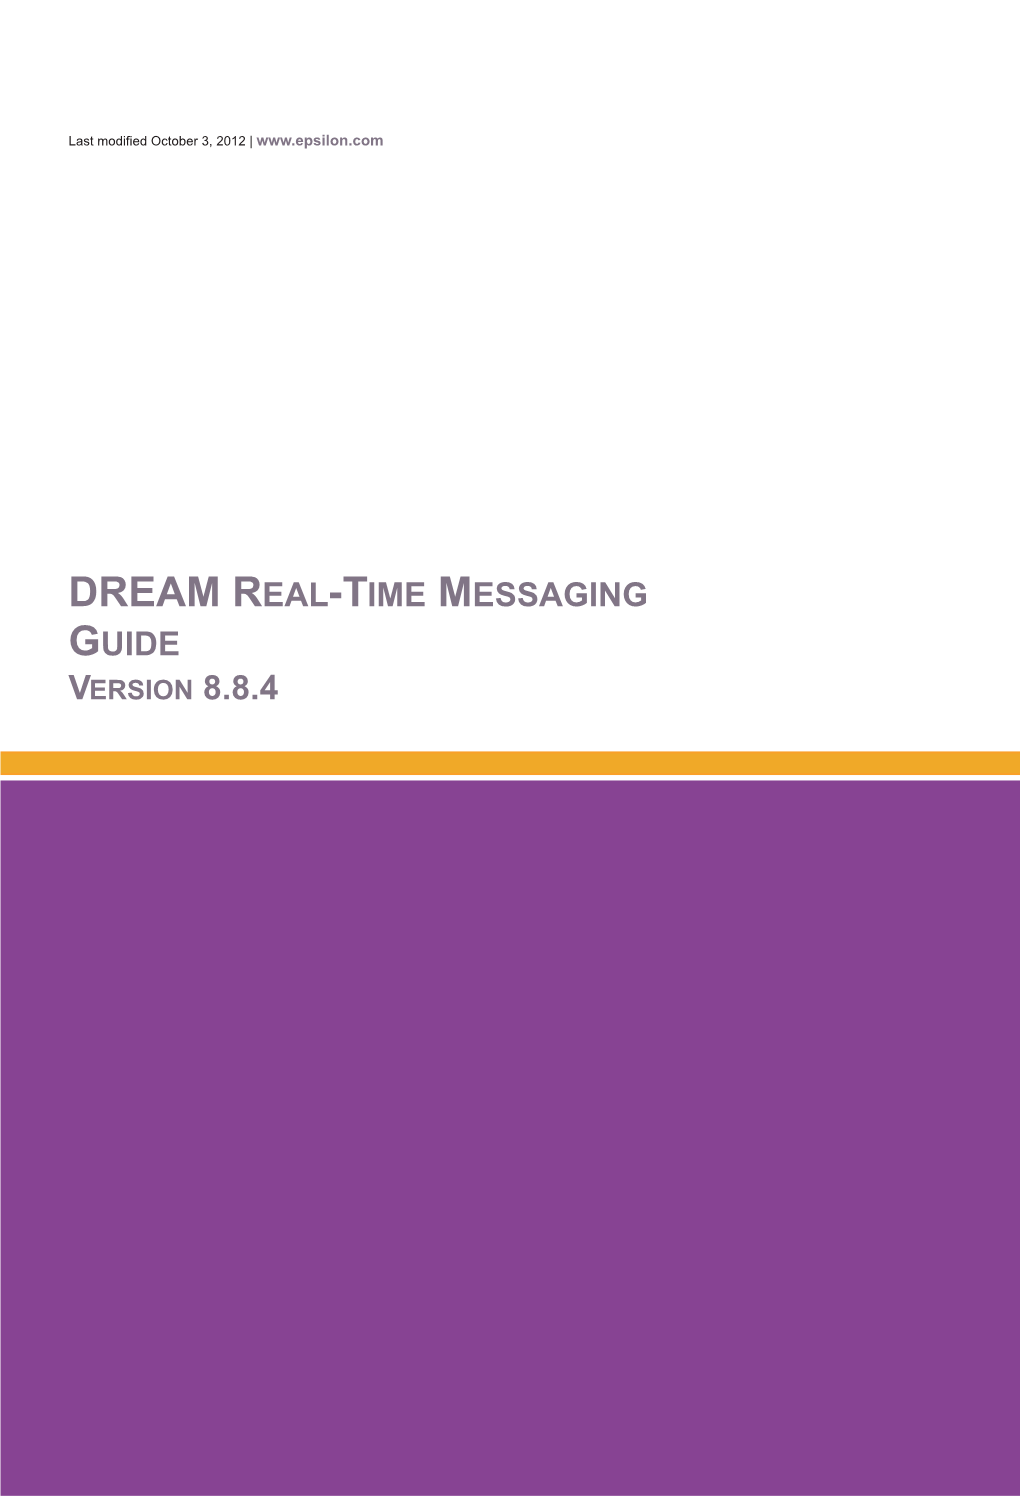 DREAM Real Time Messaging Guide